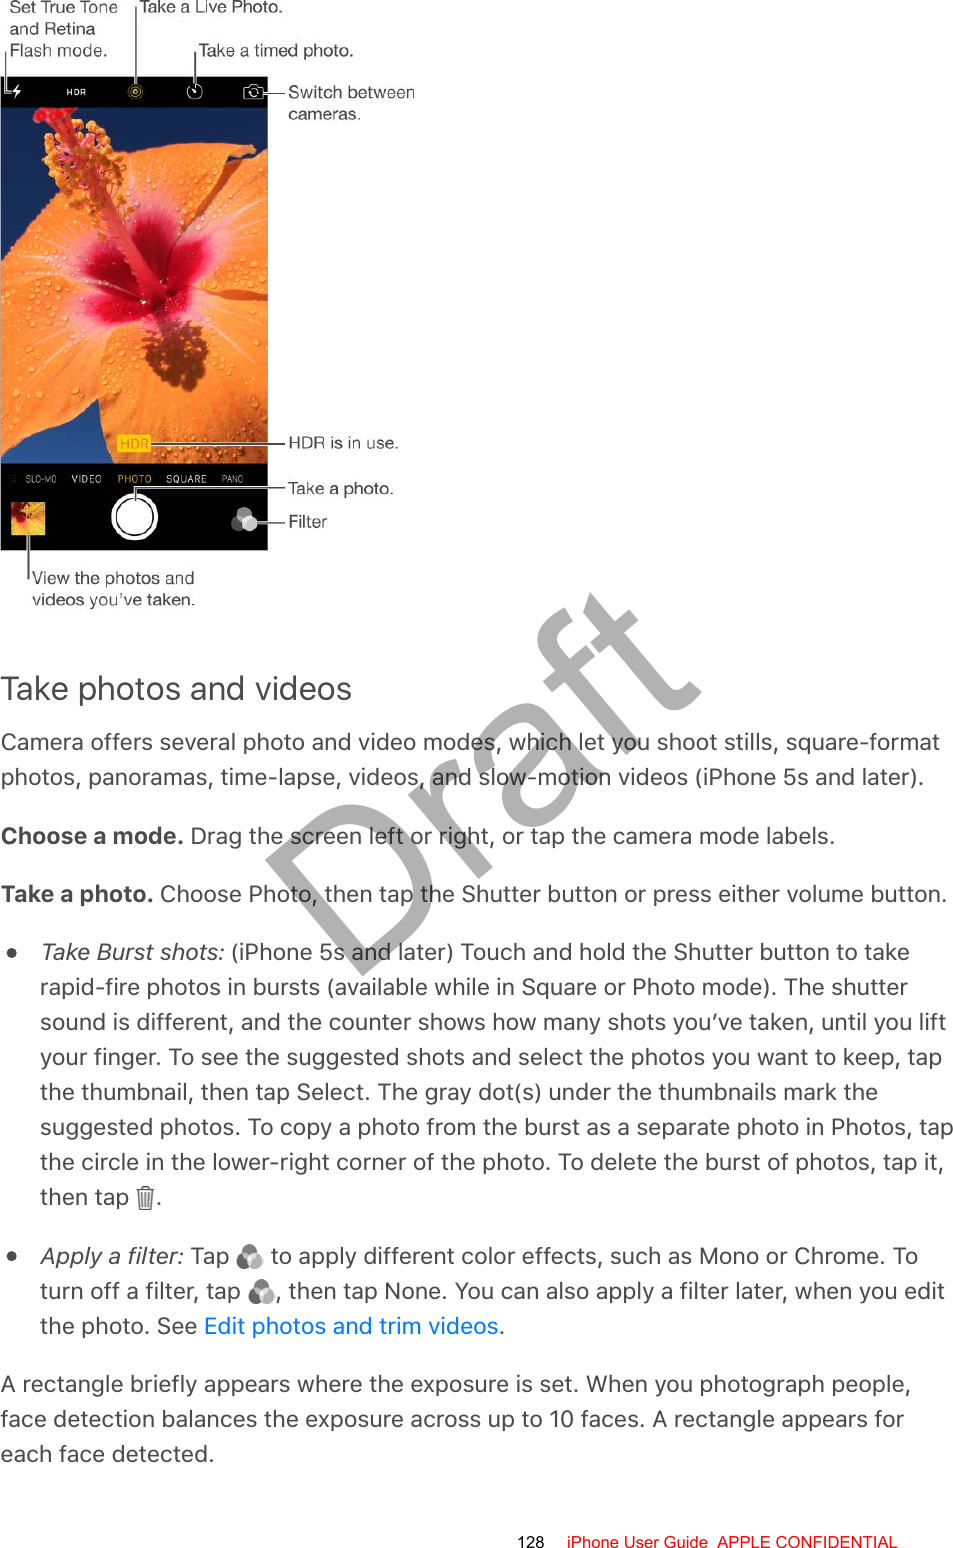 Take photos and videosCamera offers several photo and video modes, which let you shoot stills, square-formatphotos, panoramas, time-lapse, videos, and slow-motion videos (iPhone 5s and later).Choose a mode. Drag the screen left or right, or tap the camera mode labels.Take a photo. Choose Photo, then tap the Shutter button or press either volume button.Take Burst shots: (iPhone 5s and later) Touch and hold the Shutter button to takerapid-fire photos in bursts (available while in Square or Photo mode). The shuttersound is different, and the counter shows how many shots you’ve taken, until you liftyour finger. To see the suggested shots and select the photos you want to keep, tapthe thumbnail, then tap Select. The gray dot(s) under the thumbnails mark thesuggested photos. To copy a photo from the burst as a separate photo in Photos, tapthe circle in the lower-right corner of the photo. To delete the burst of photos, tap it,then tap  .Apply a filter: Tap   to apply different color effects, such as Mono or Chrome. Toturn off a filter, tap  , then tap None. You can also apply a filter later, when you editthe photo. See  .A rectangle briefly appears where the exposure is set. When you photograph people,face detection balances the exposure across up to 10 faces. A rectangle appears foreach face detected.Edit photos and trim videos128 iPhone User Guide  APPLE CONFIDENTIALDraft